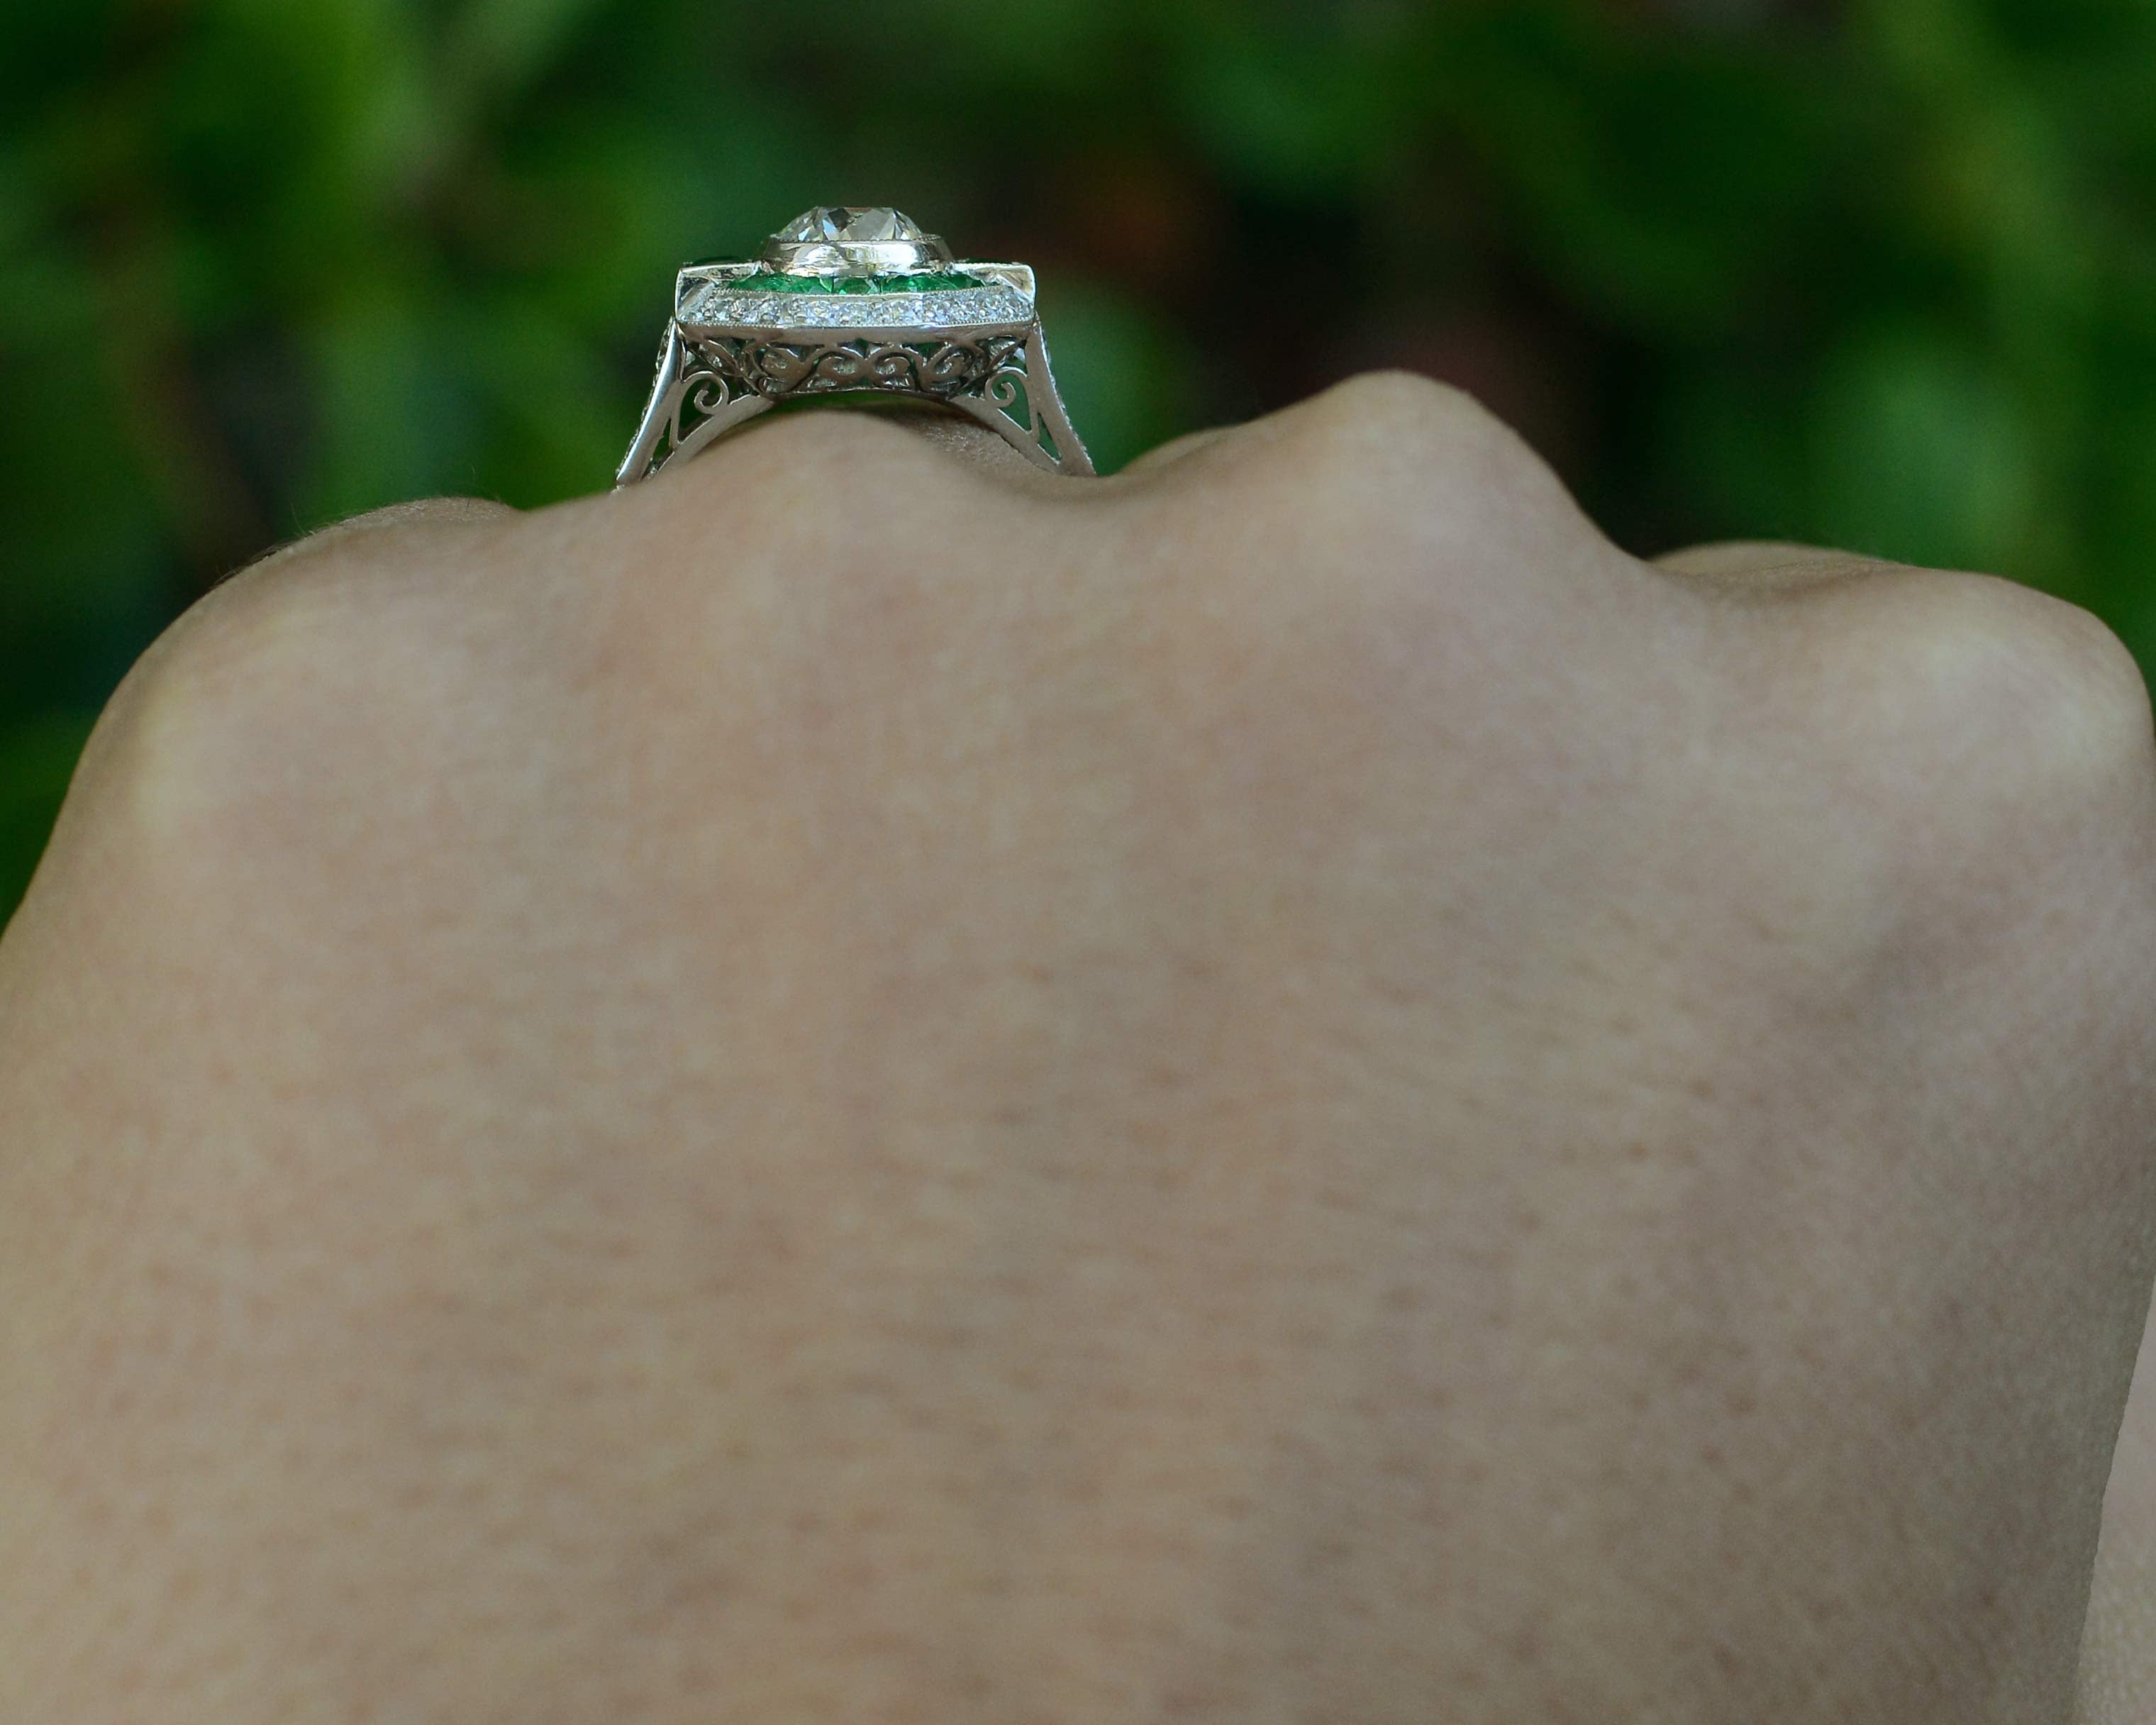 A hand crafted diamond emerald engagement ring, fabricated in the Art Deco style.